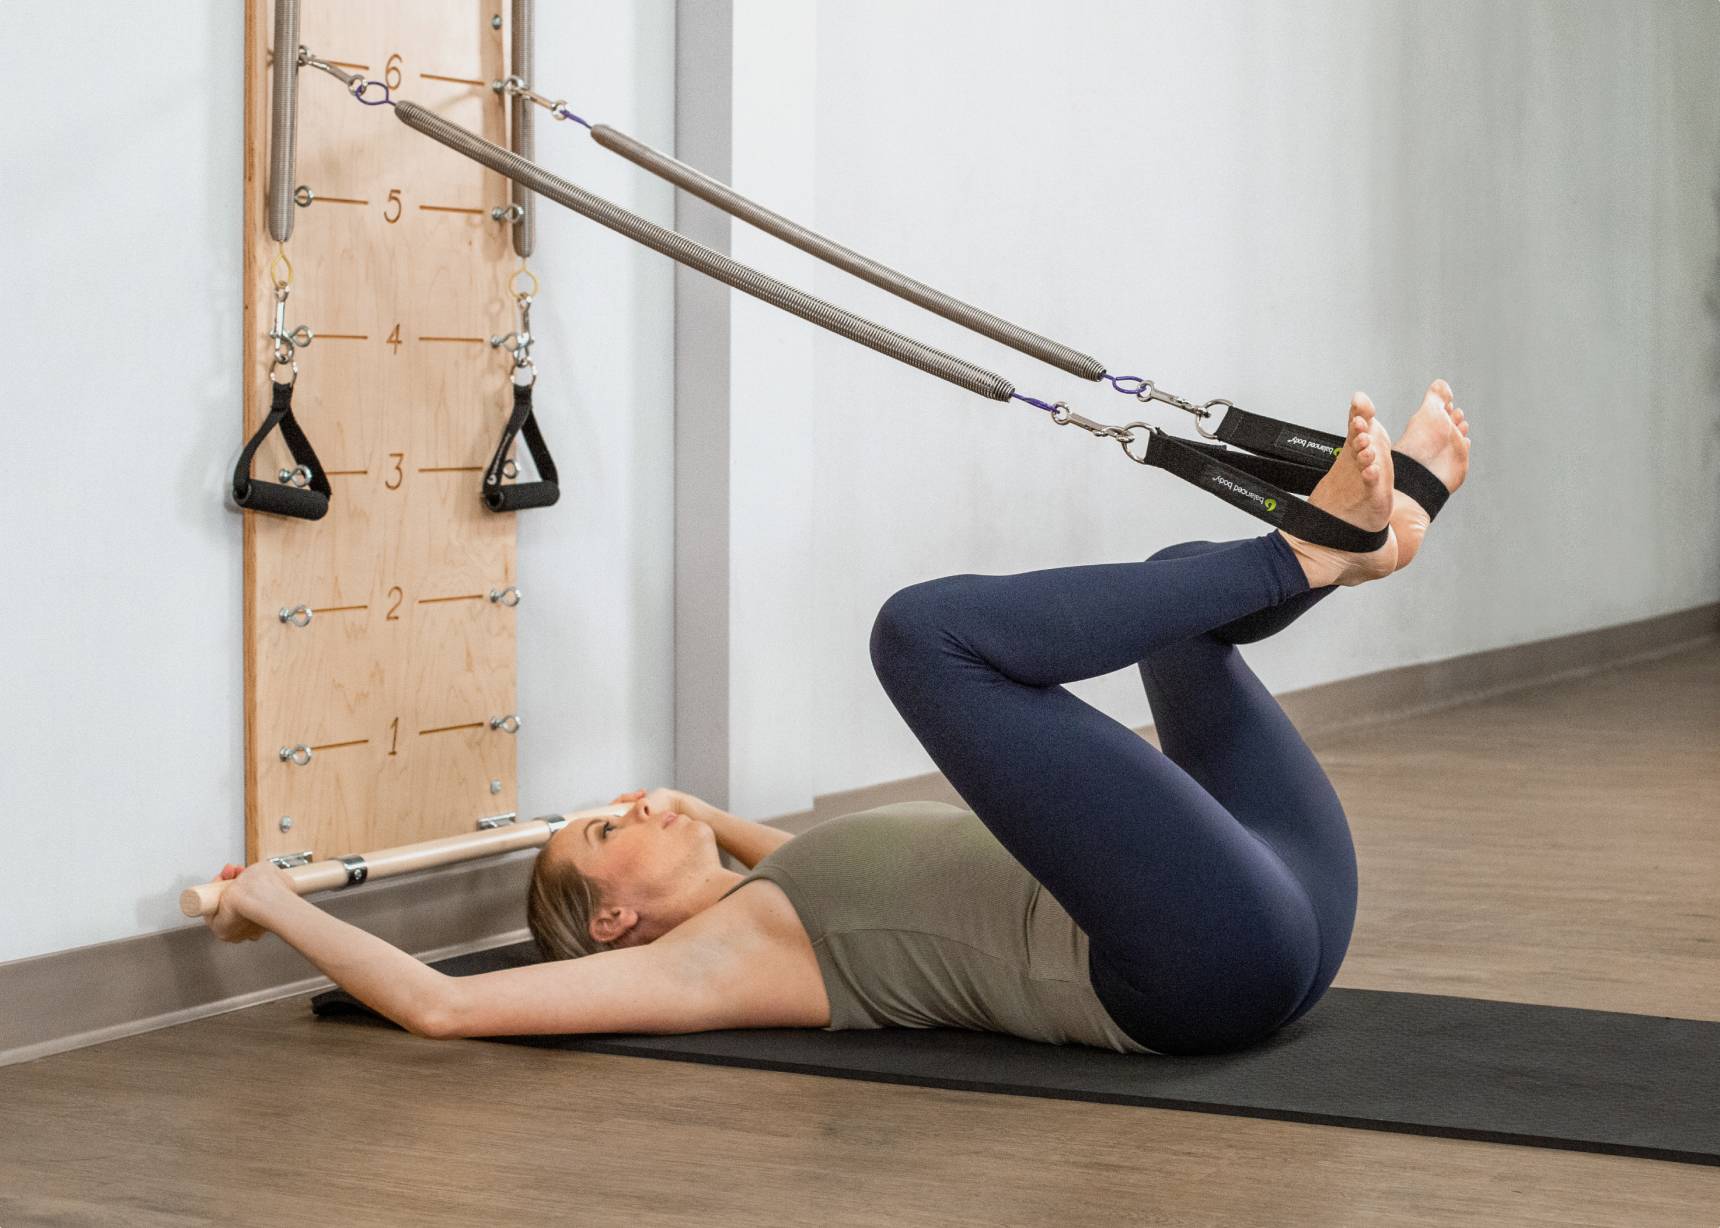 A woman engaged in a guided workout session using a springboard designed for Pilates exercises.